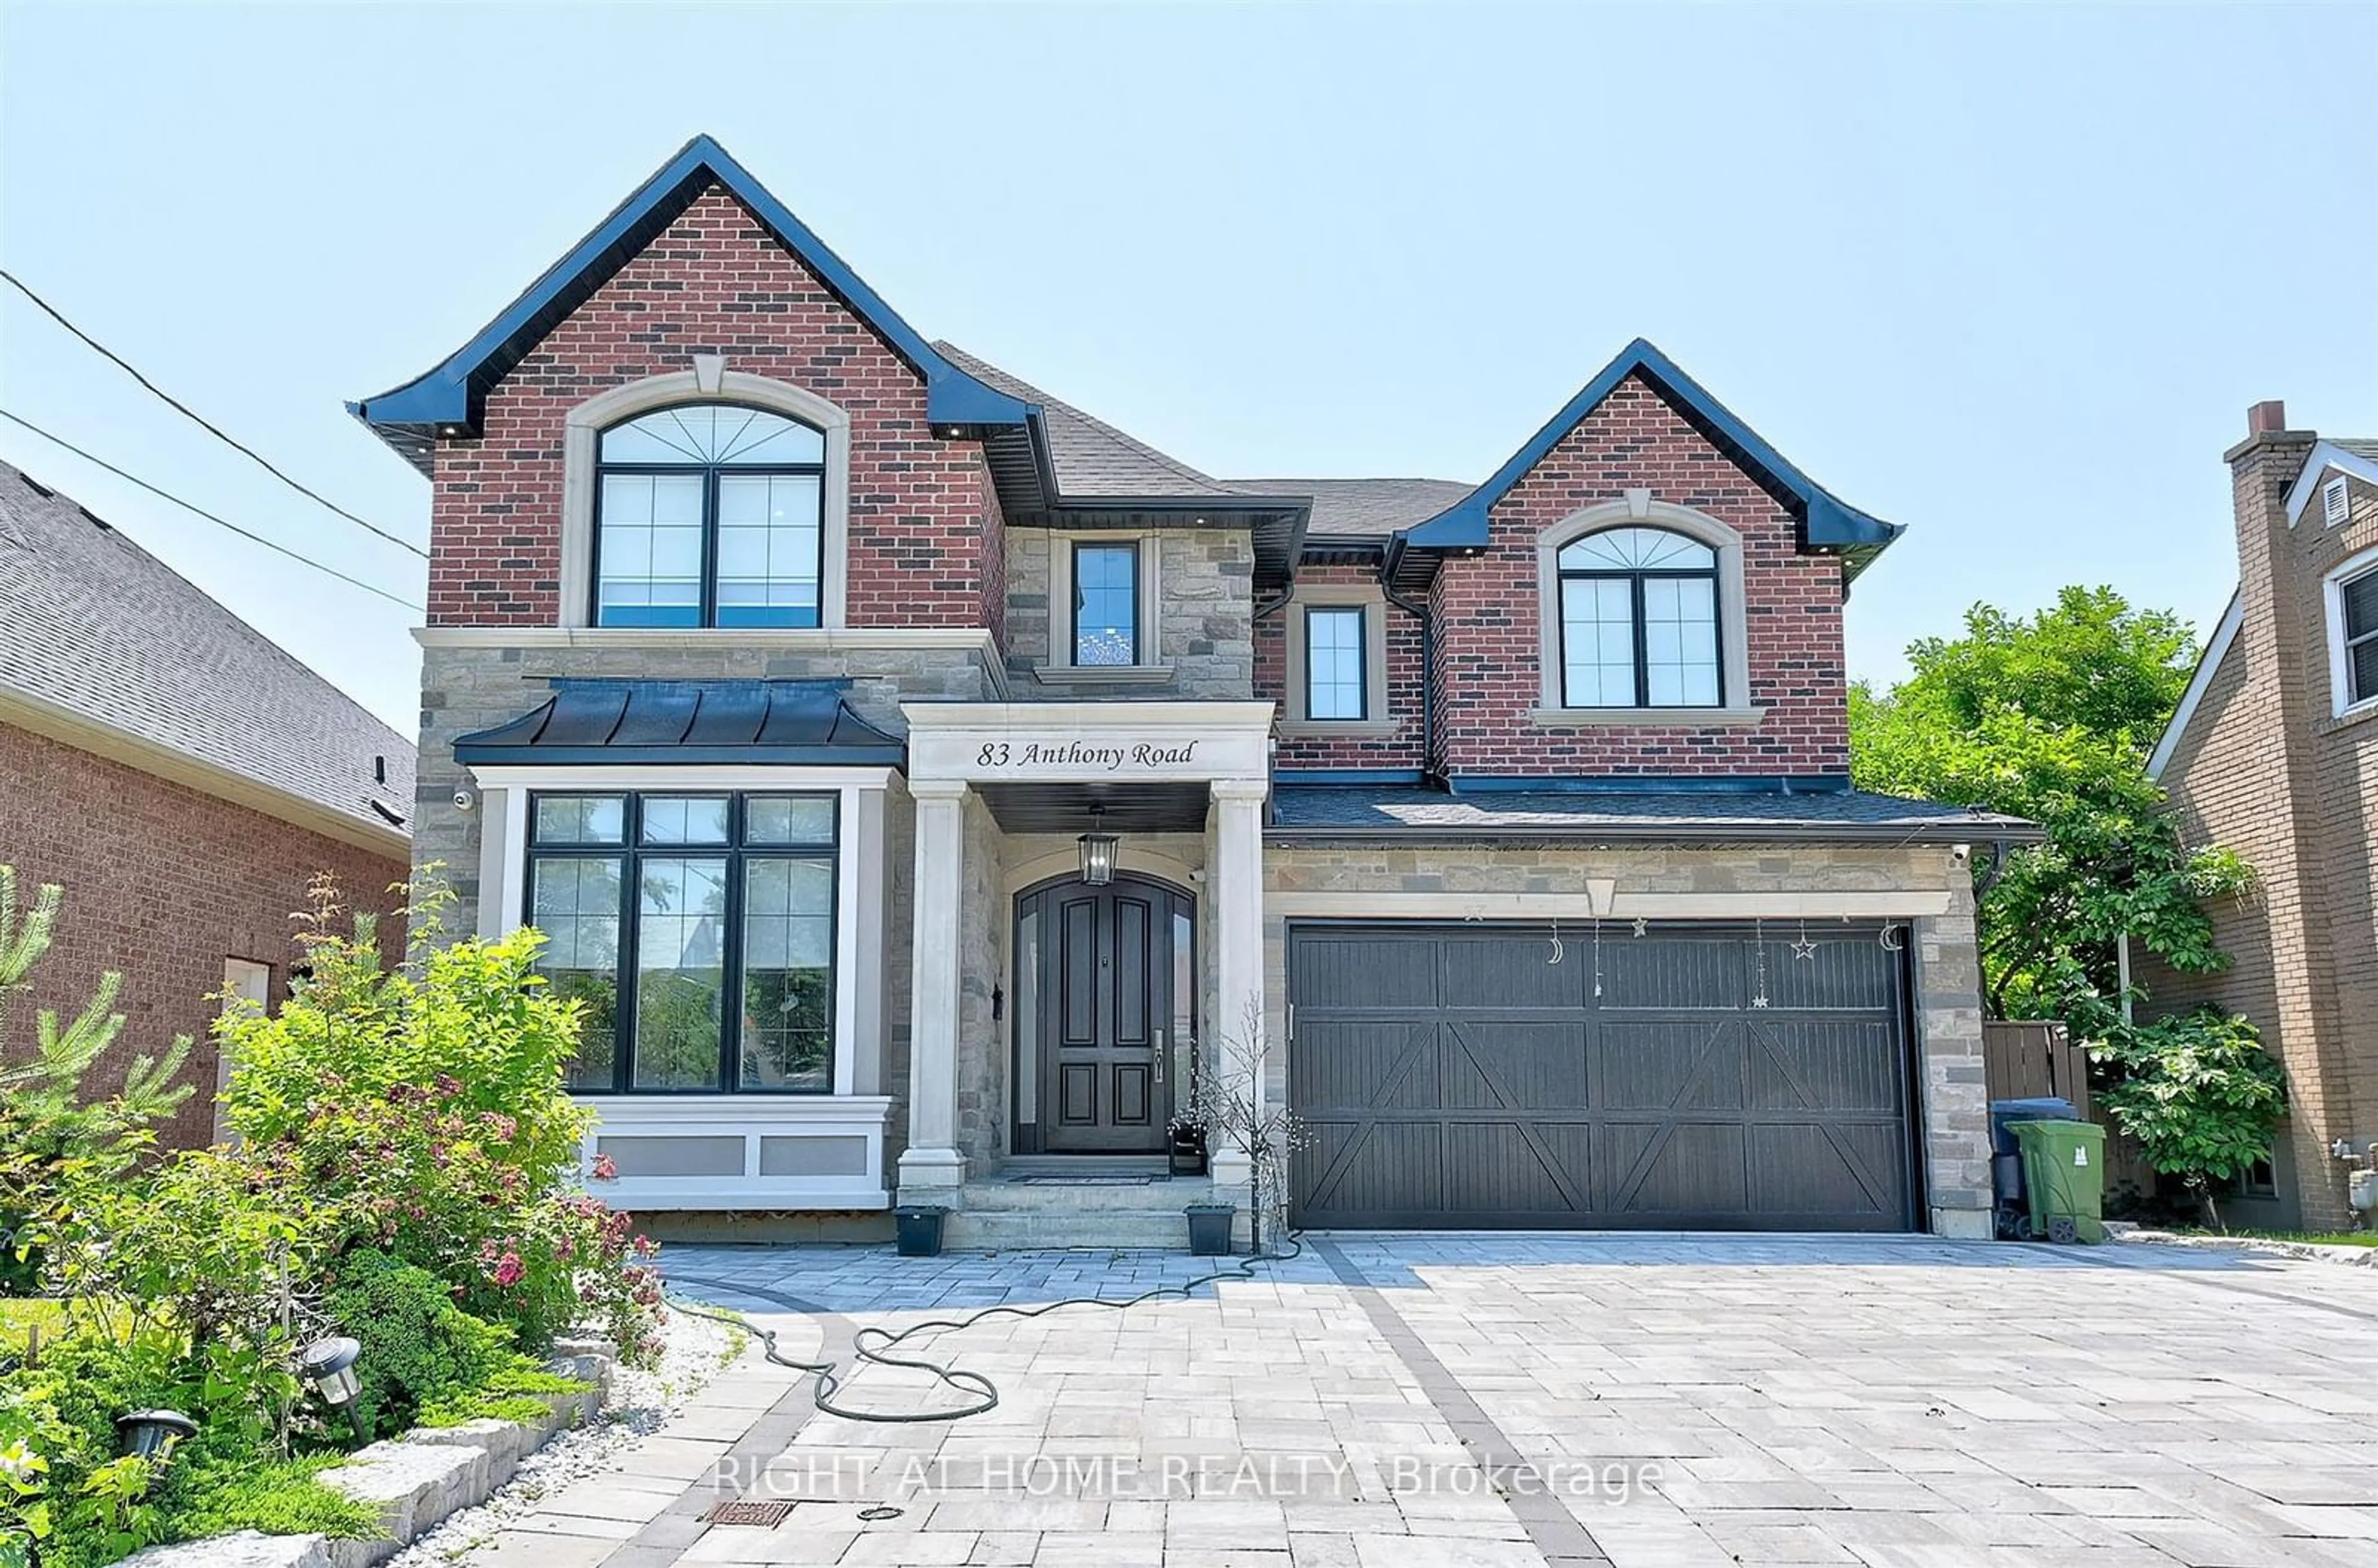 Home with brick exterior material for 83 Anthony Rd, Toronto Ontario M3K 1B5